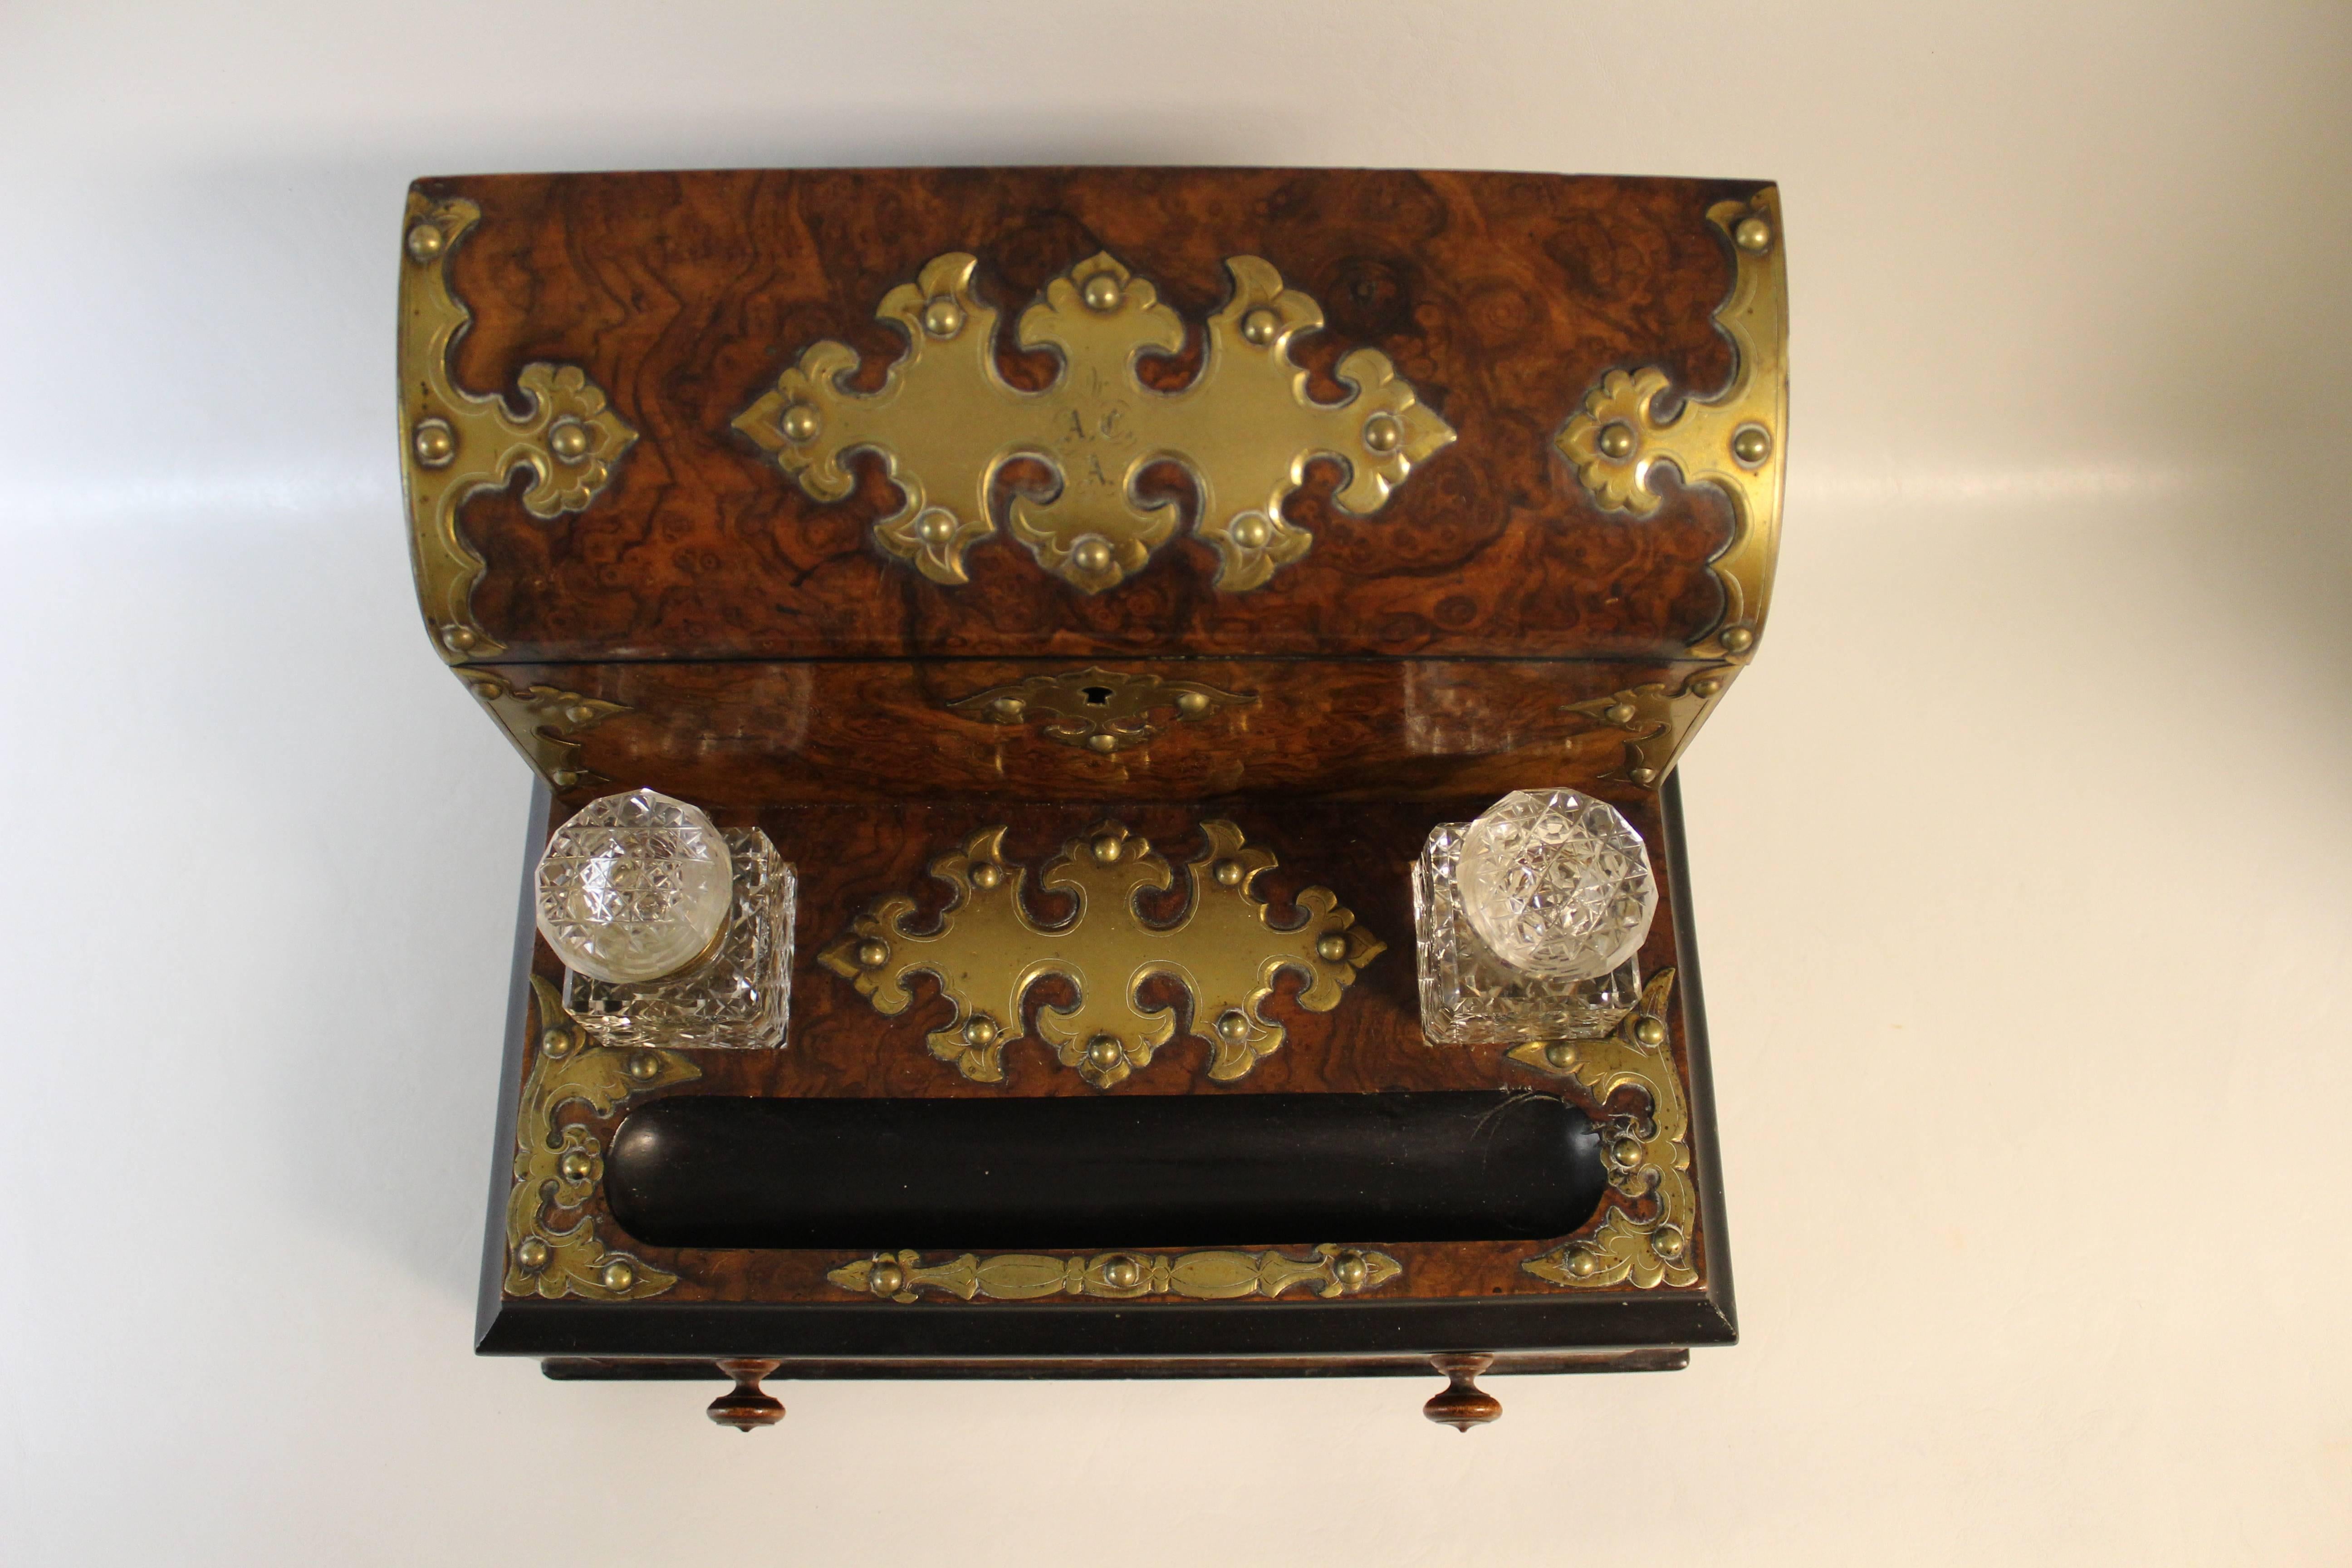 English stationary box made of burl walnut with chased brass mounts. This lovely victorian box opens to reveal fitted compartments and a royal blue moire silk lining inside the top. The base of the desk set is sitting on four turned feet supporting